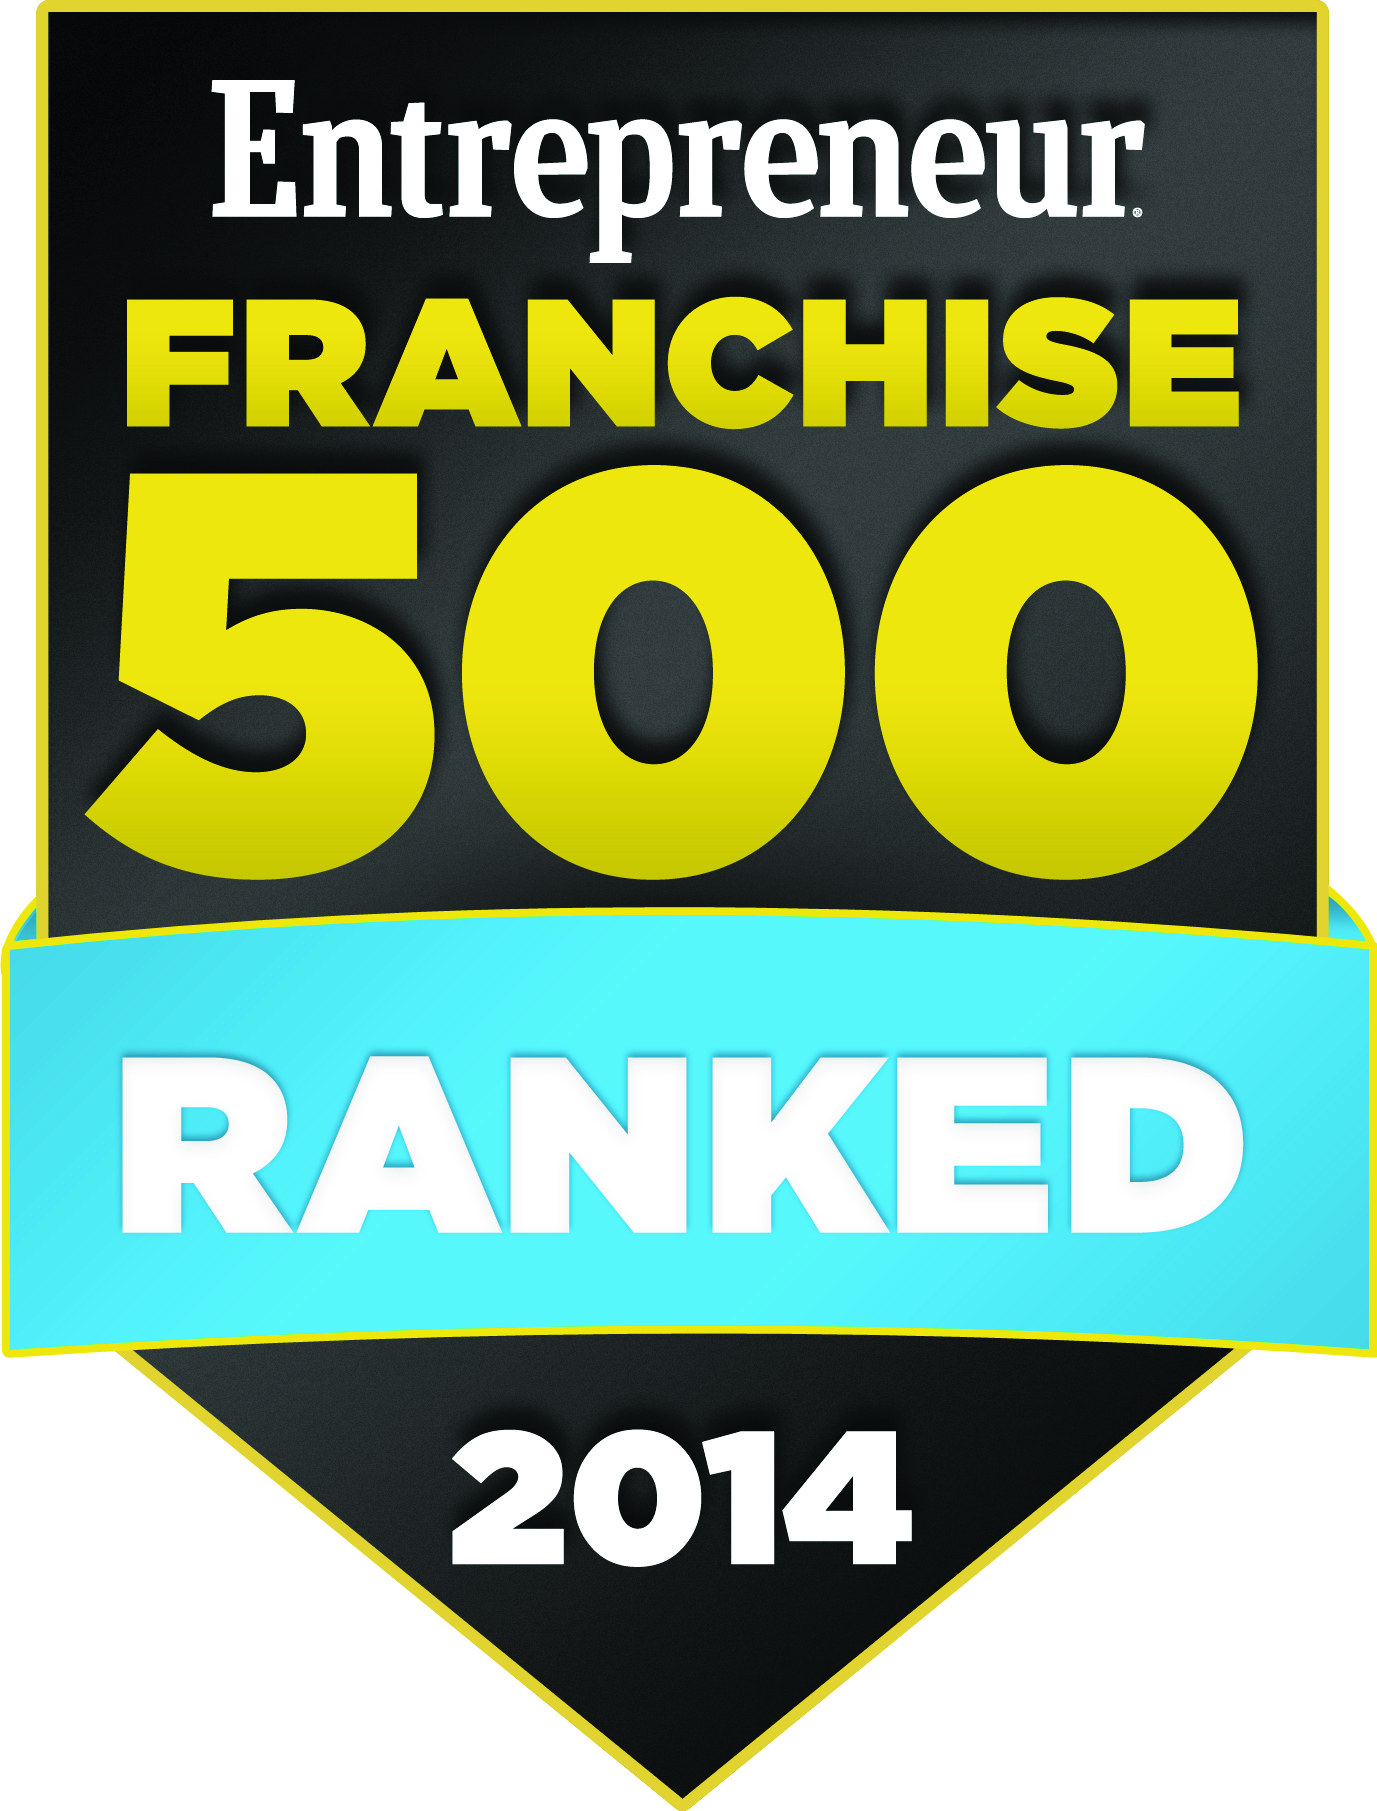 Entrepreneur Magazine chooses a few select Franchise organizations to be a part of this program